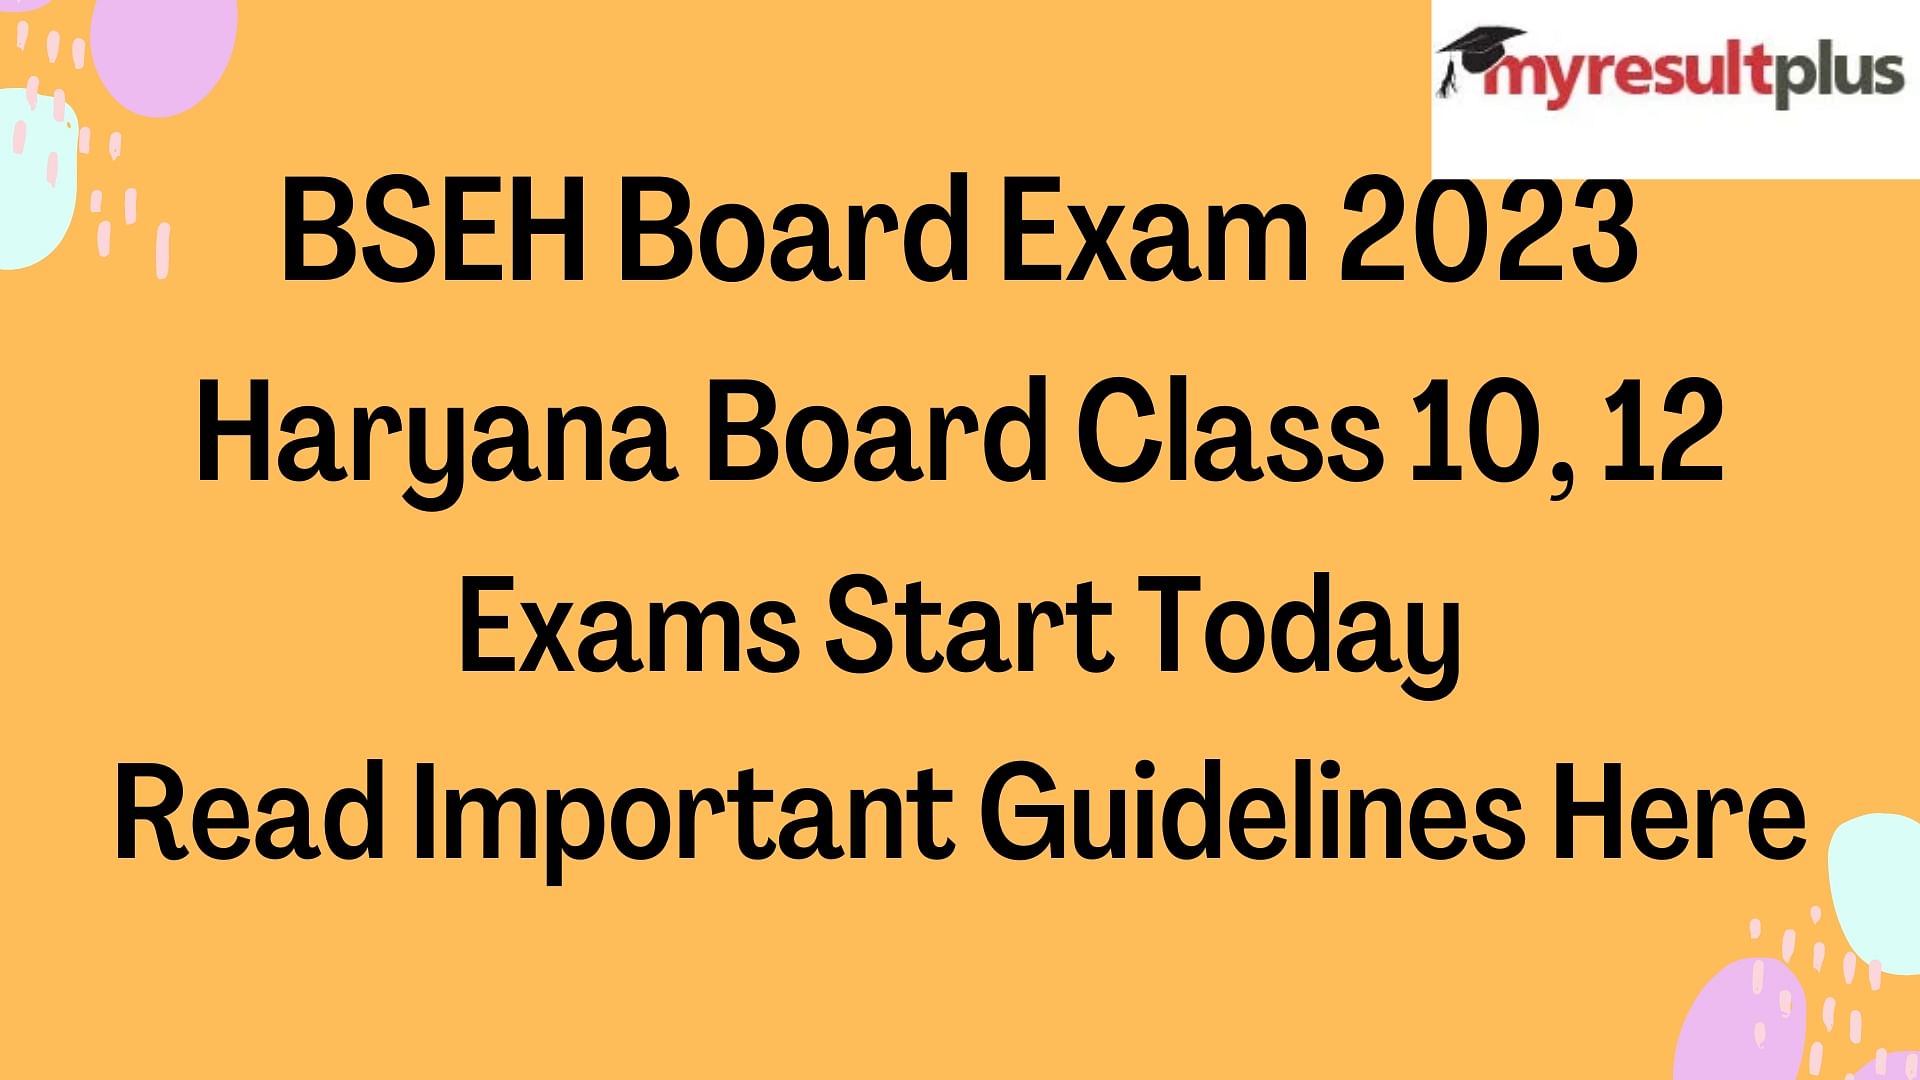 BSEH Board Exam 2023: Haryana Board Class 10, 12 Exams Start Today; Read Important Guidelines Here